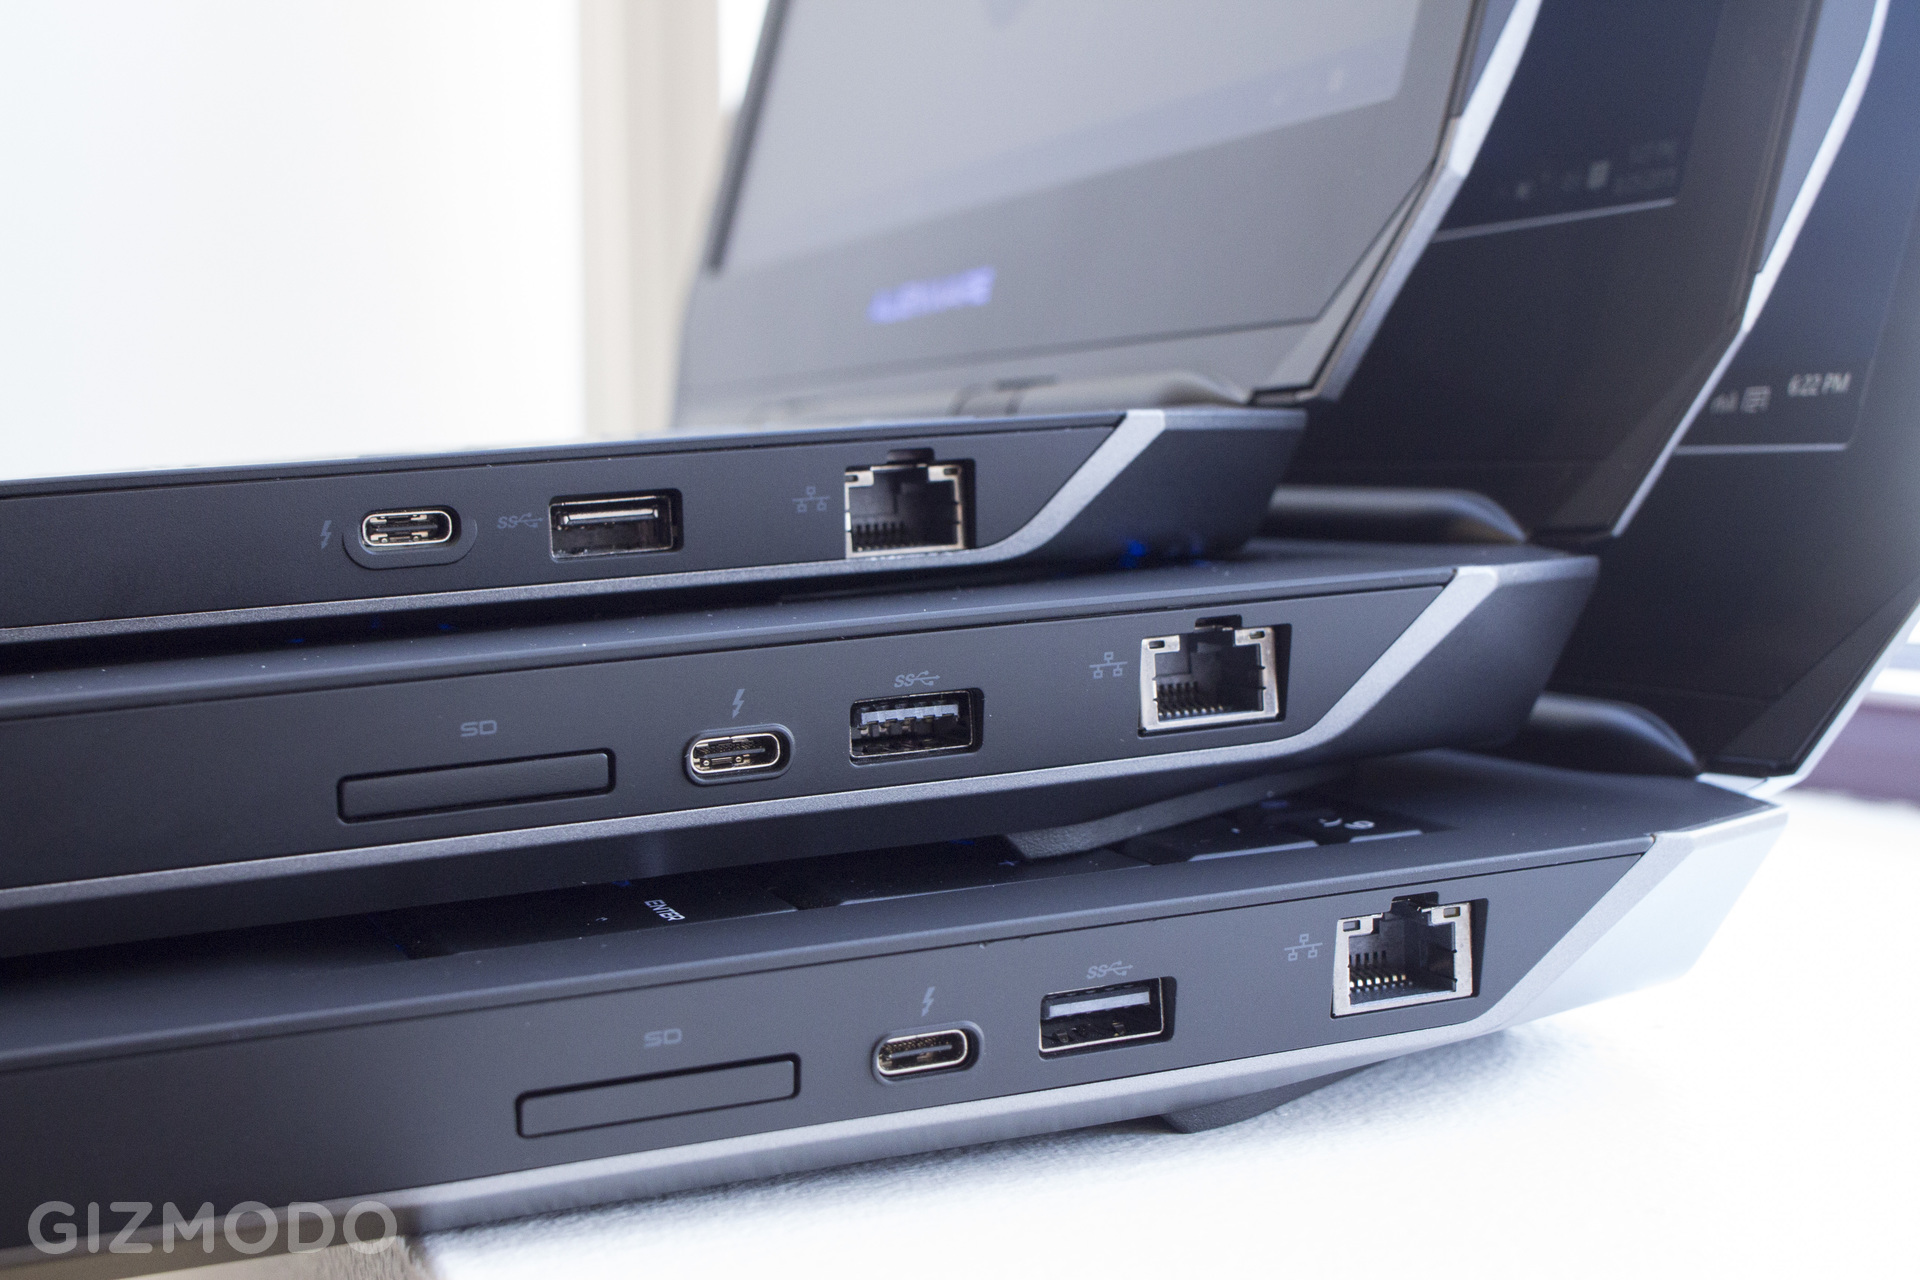 Alienware’s Small Gaming Desktop Is Getting A Big Boost